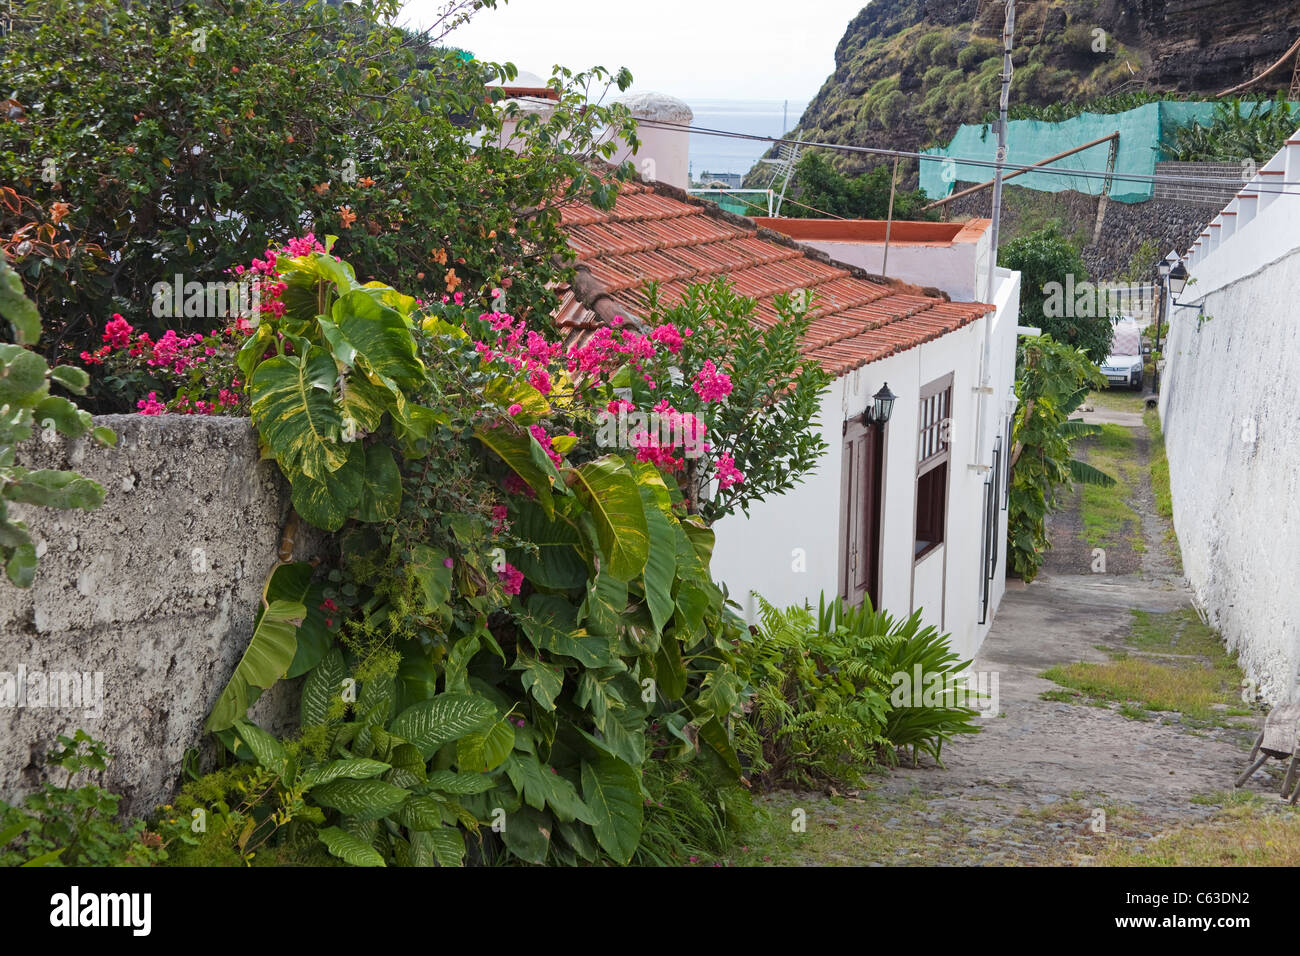 Alley with wild flowers, houses at Puerto Tazacorte, Tazacorte, La Palma, Canary islands, Spain, Europe Stock Photo